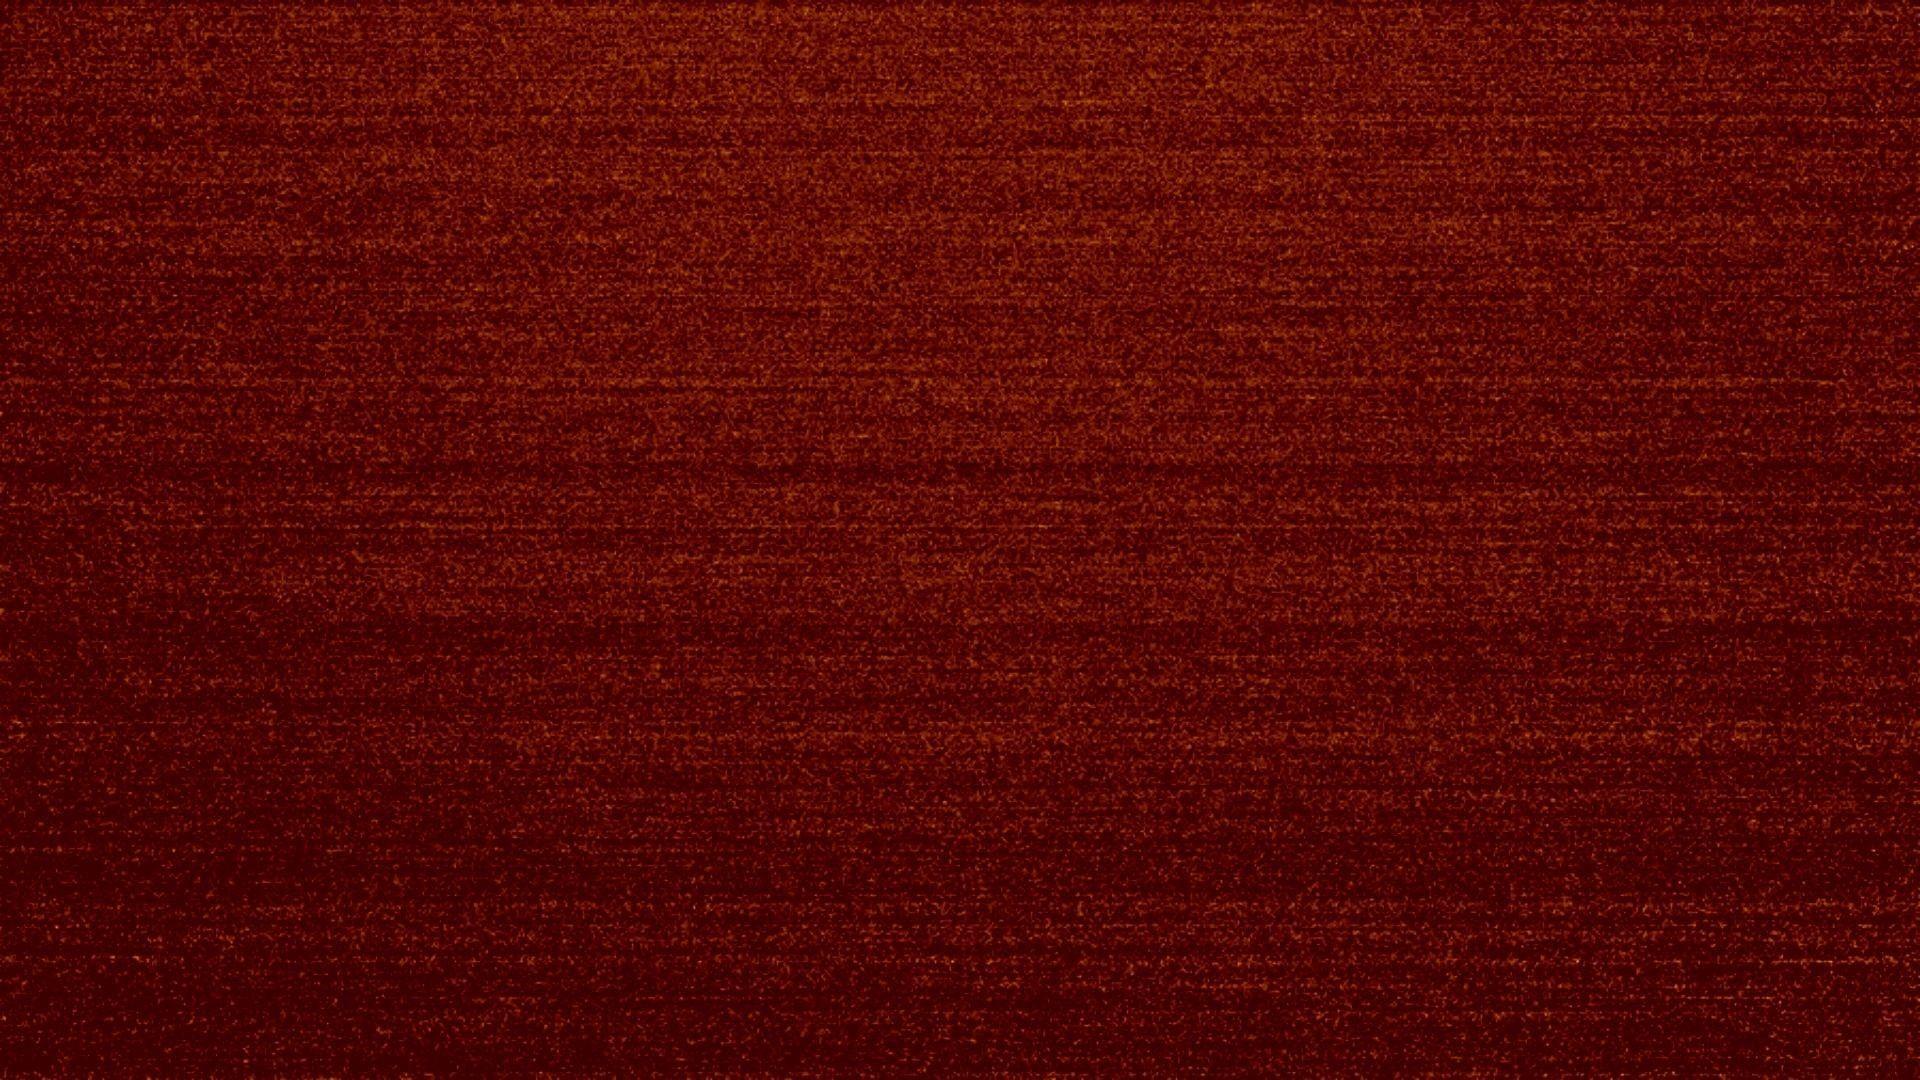 Maroon Color Backgrounds.